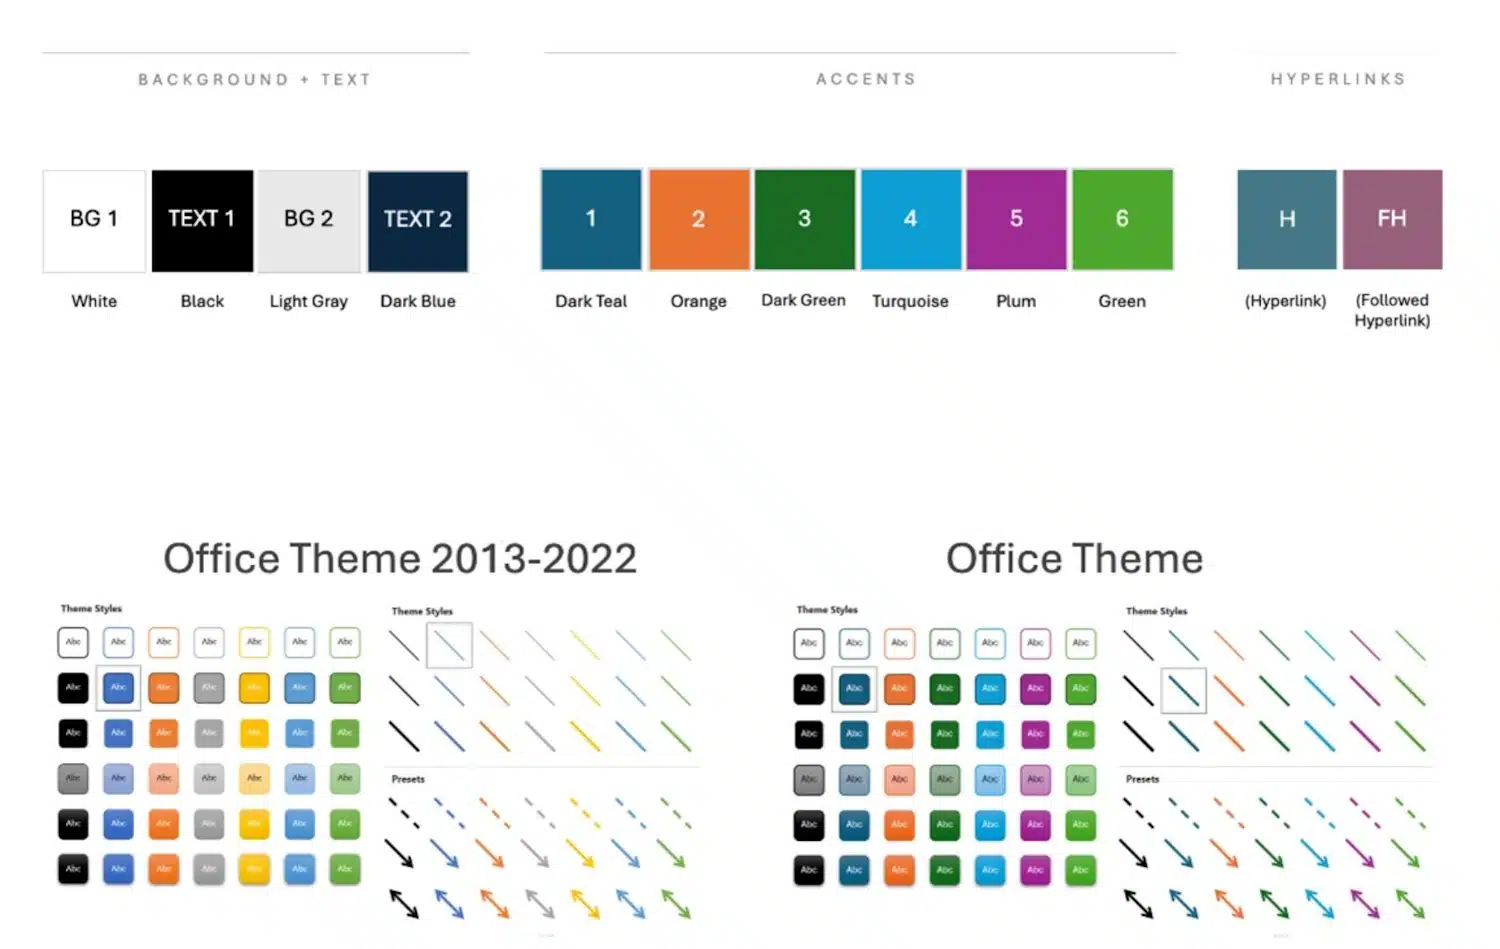 Microsoft Office has a brand new look